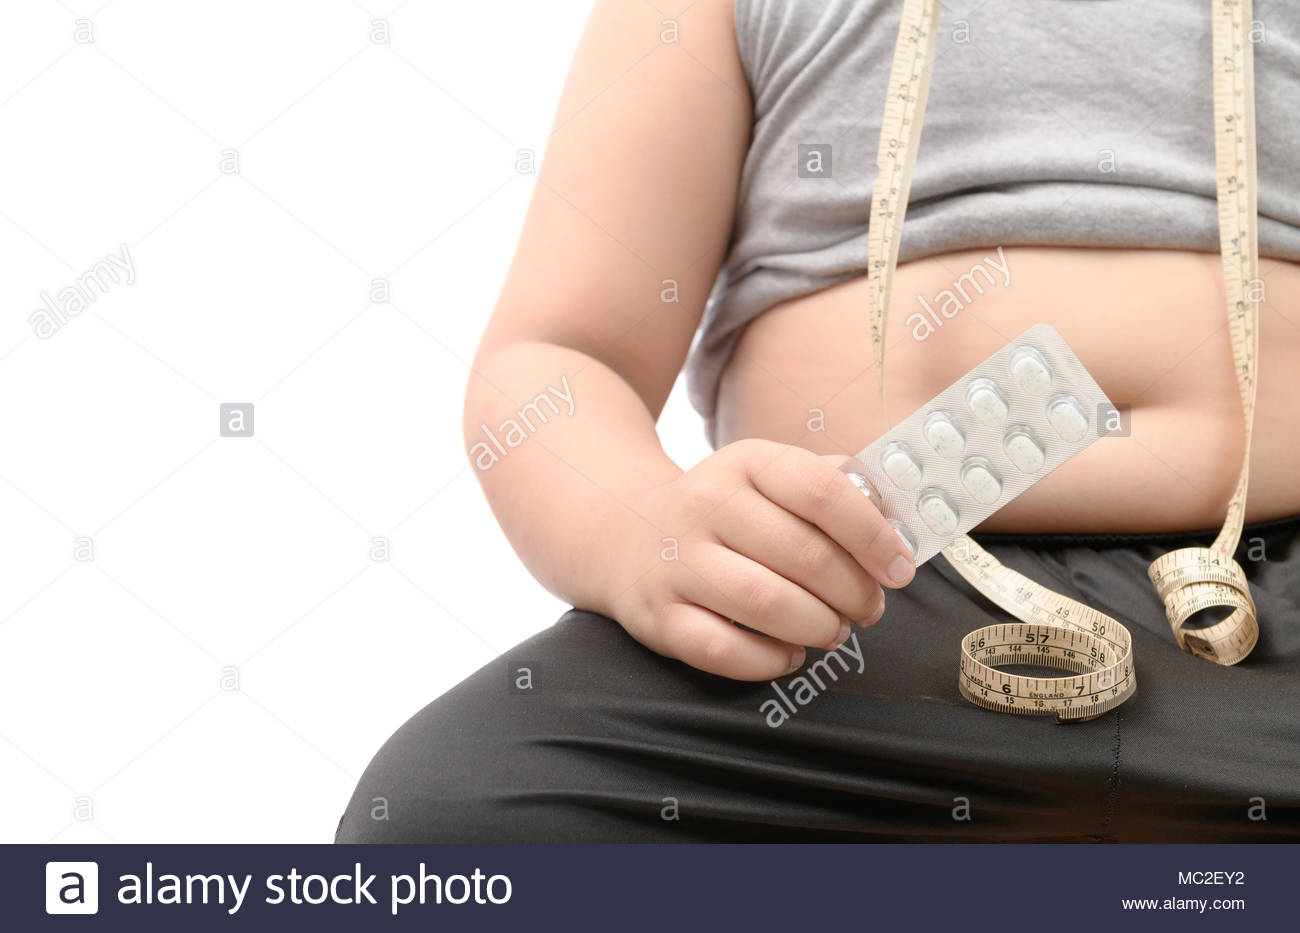 Overweight Fat Boy With Obese Belly Taking Slimming Pills Isolated